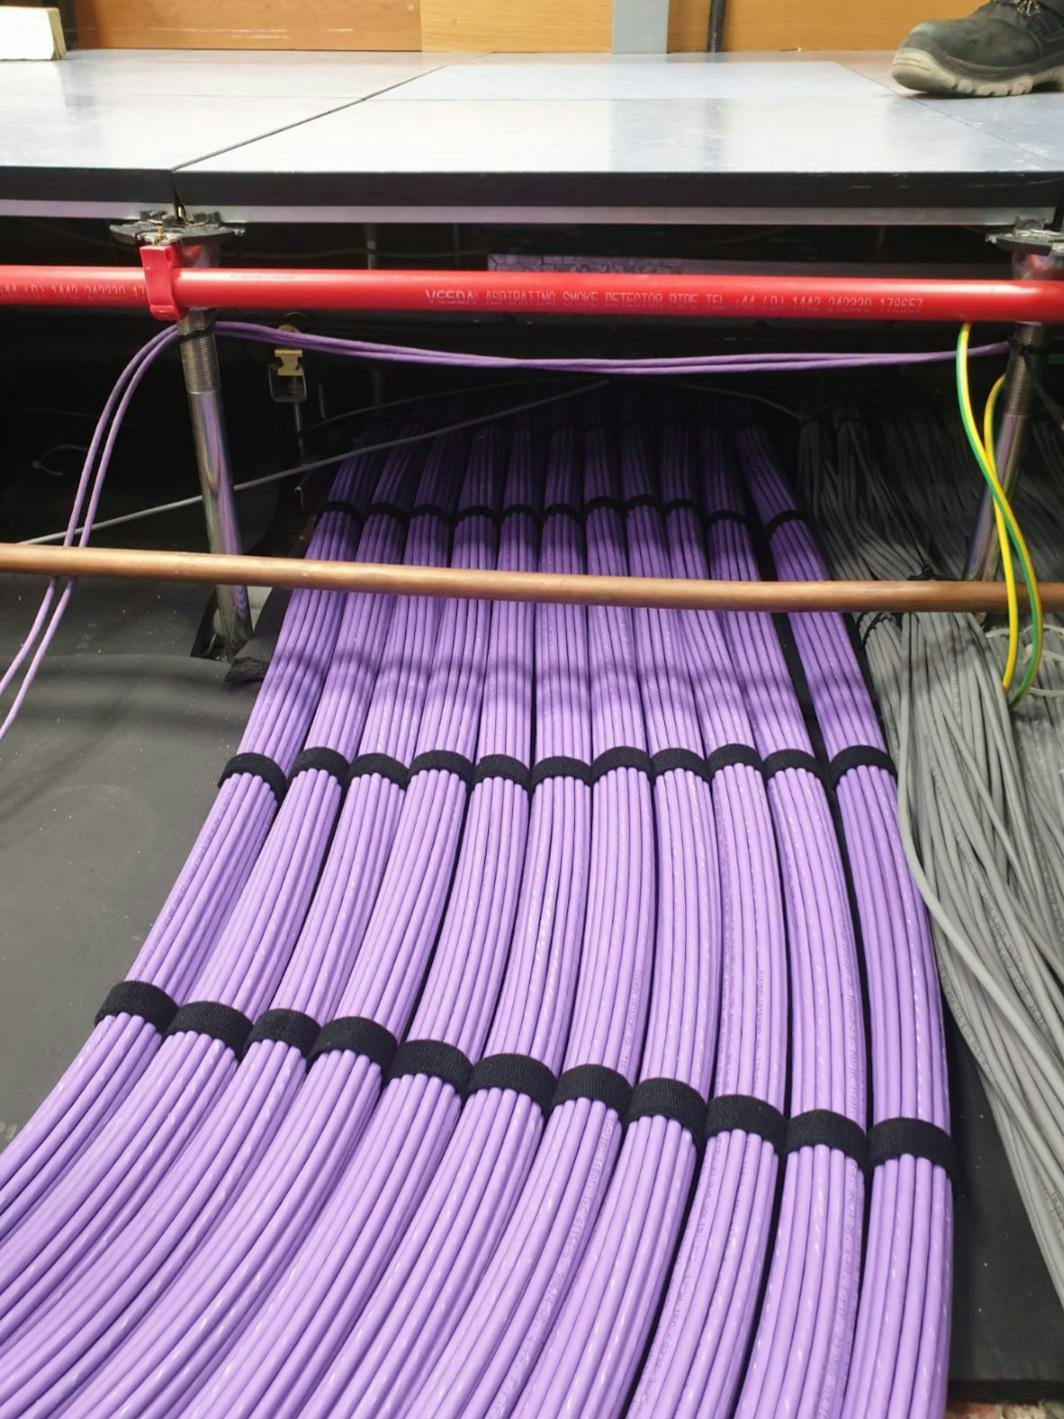 Neatly bundled data cables in a data center